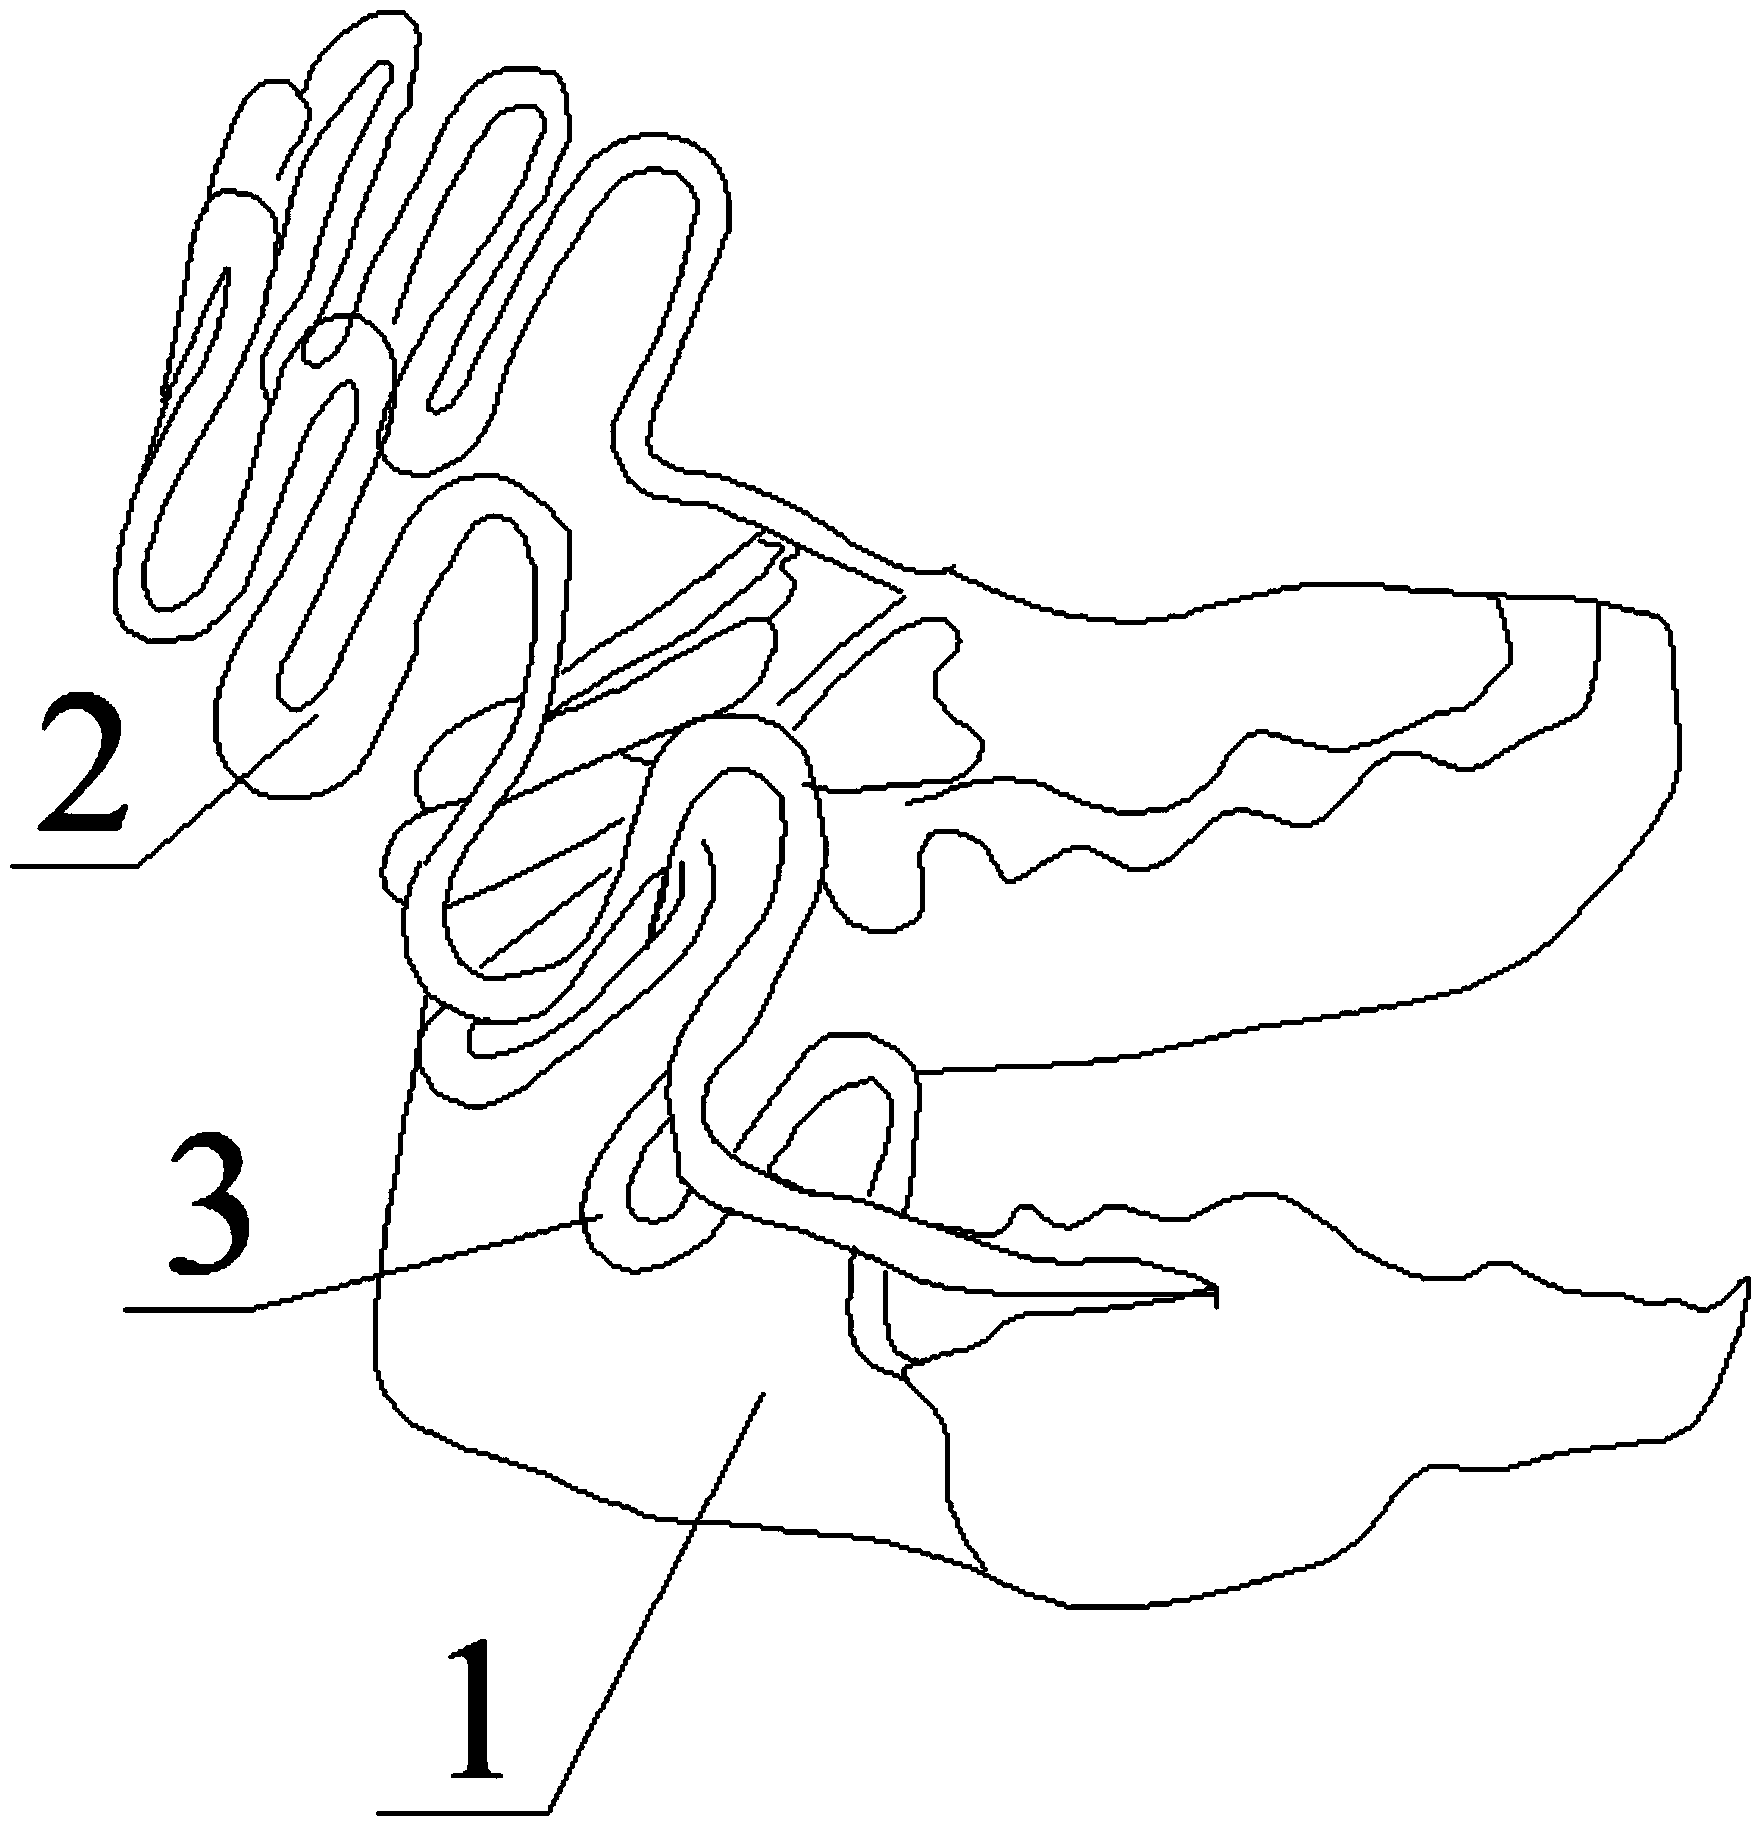 Interactive appliance of upper and lower jaws